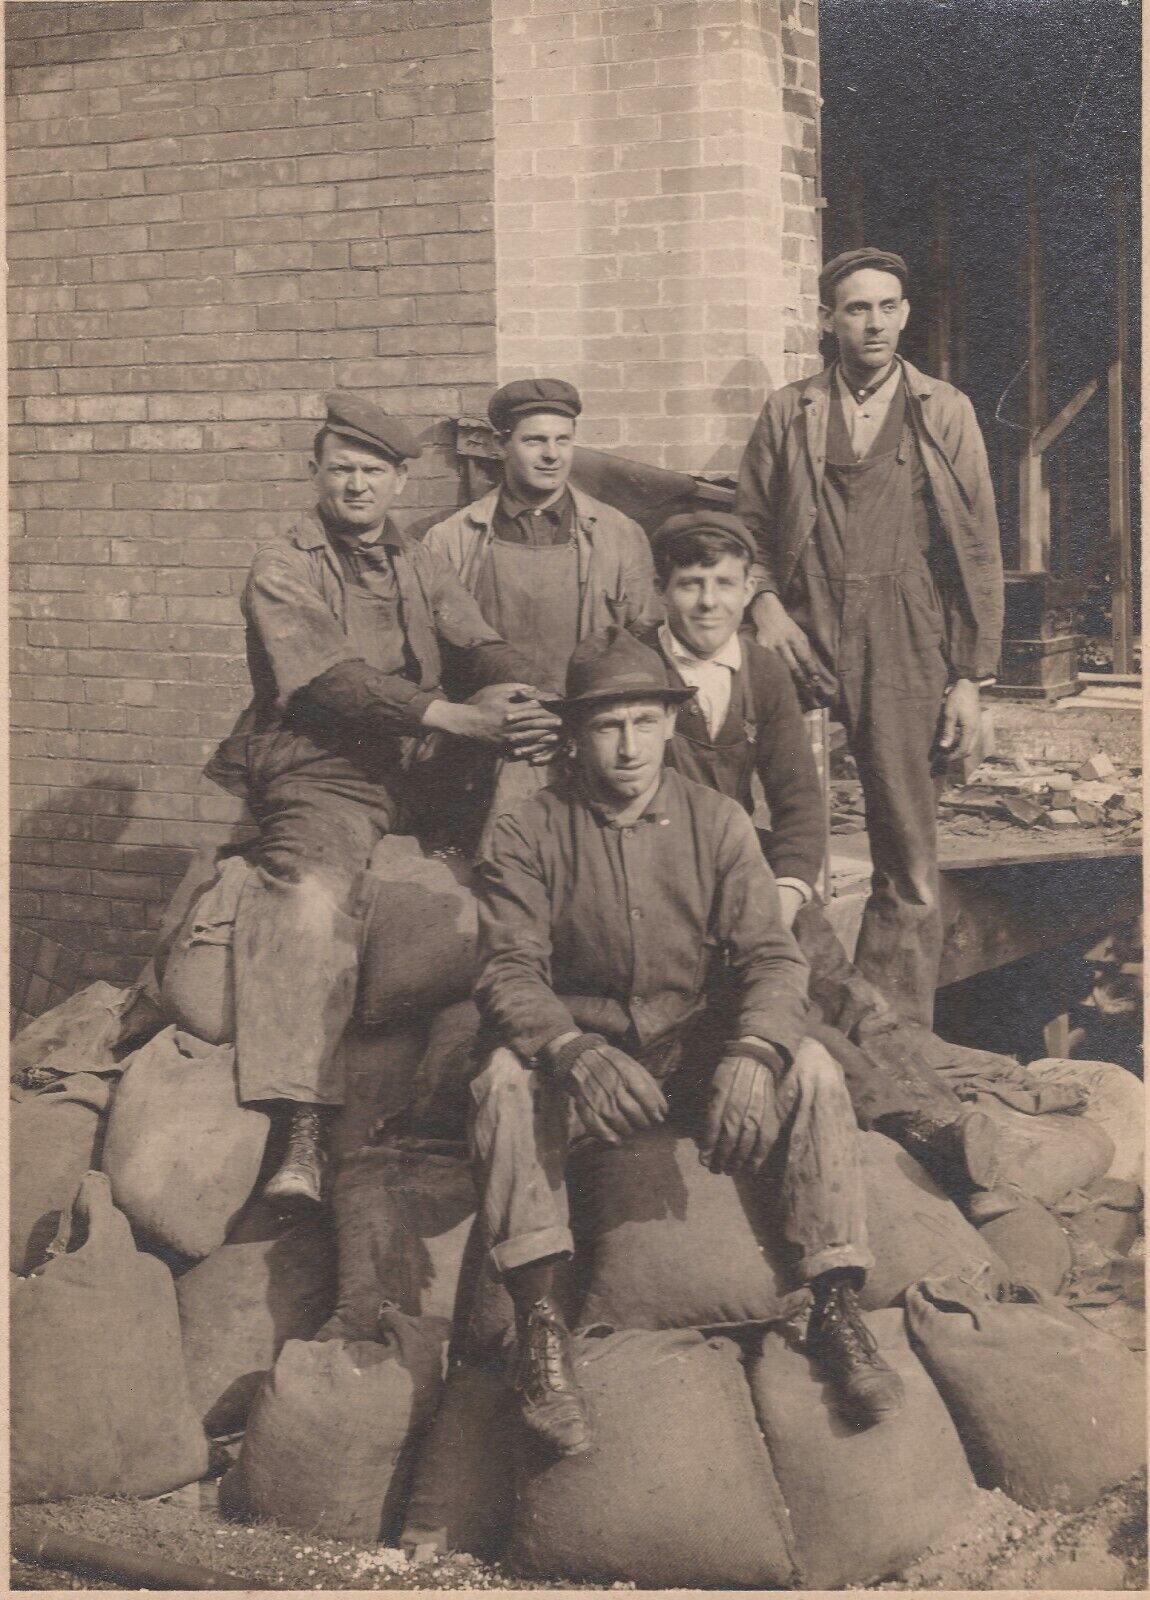 CONSTRUCTION WORKERS, OCCUPATIONAL, HANDSOME MEN, VANDERMAN STRONG BOX, PHOTO 